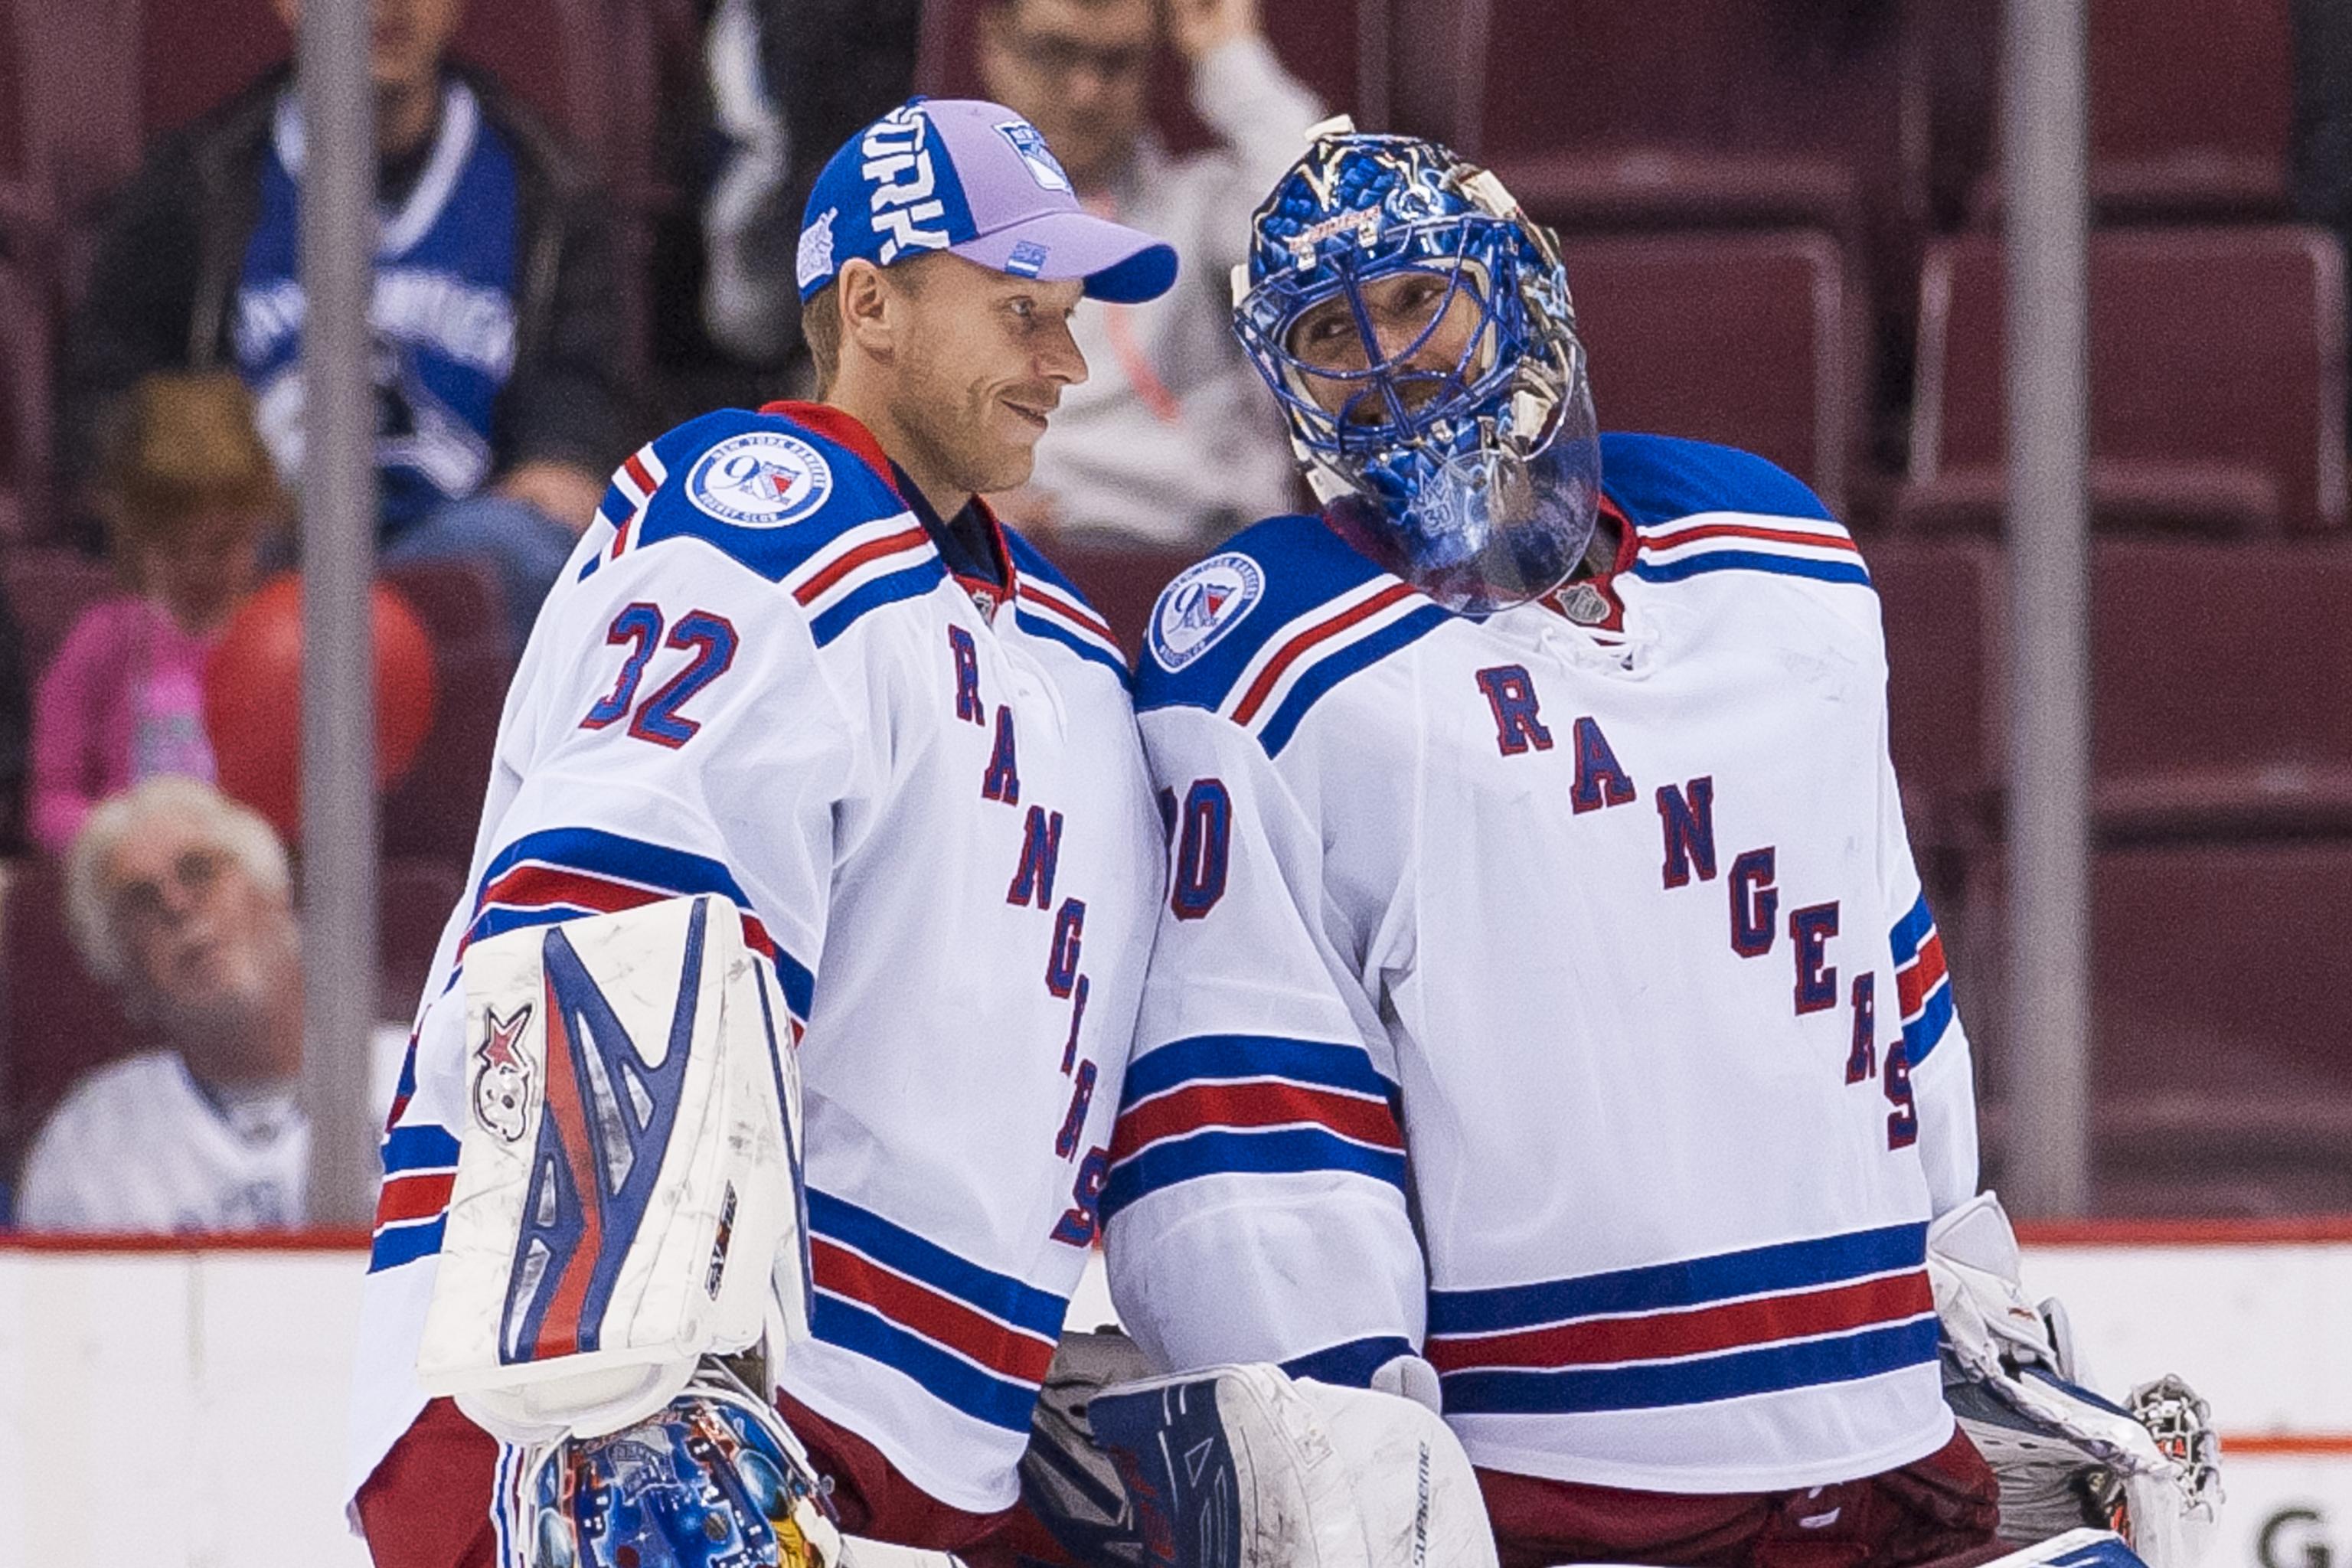 It's time for Henrik Lundqvist to accept a trade